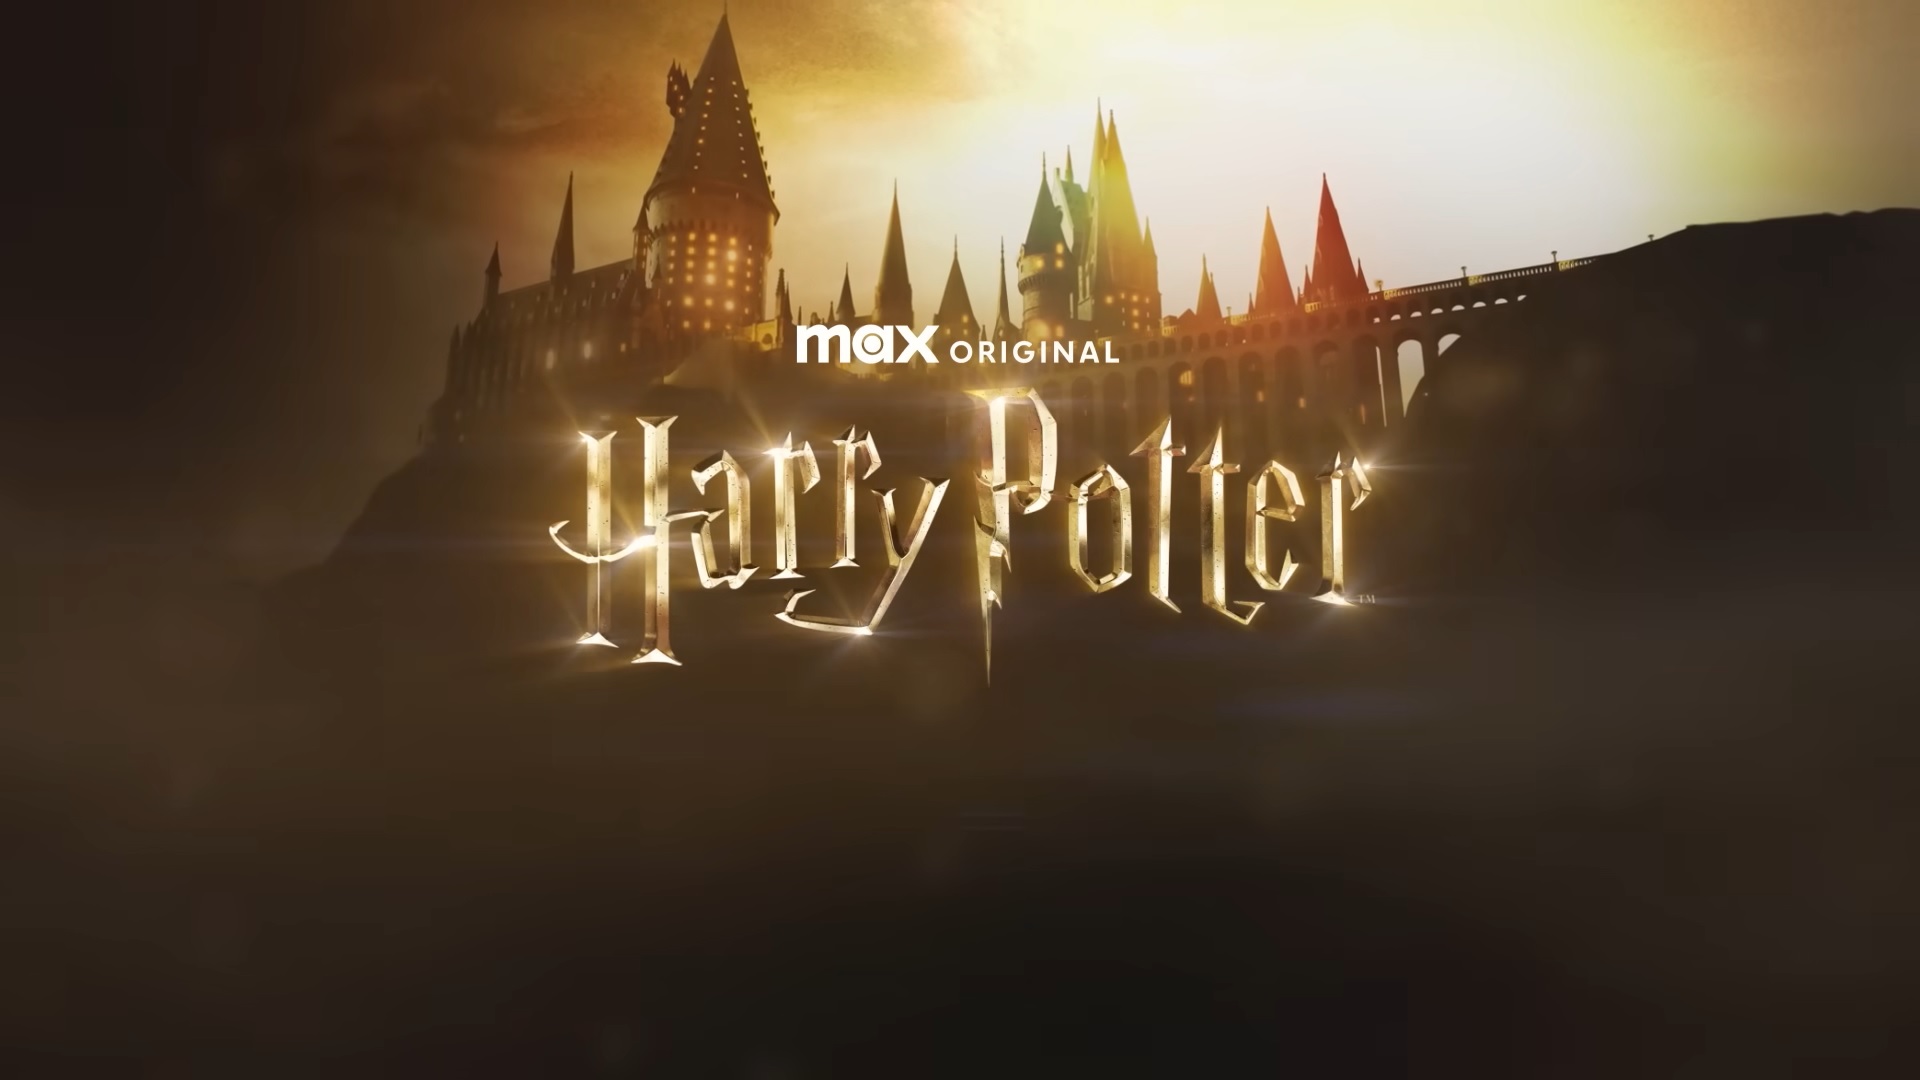 HBO Max has a year plan for the next Harry